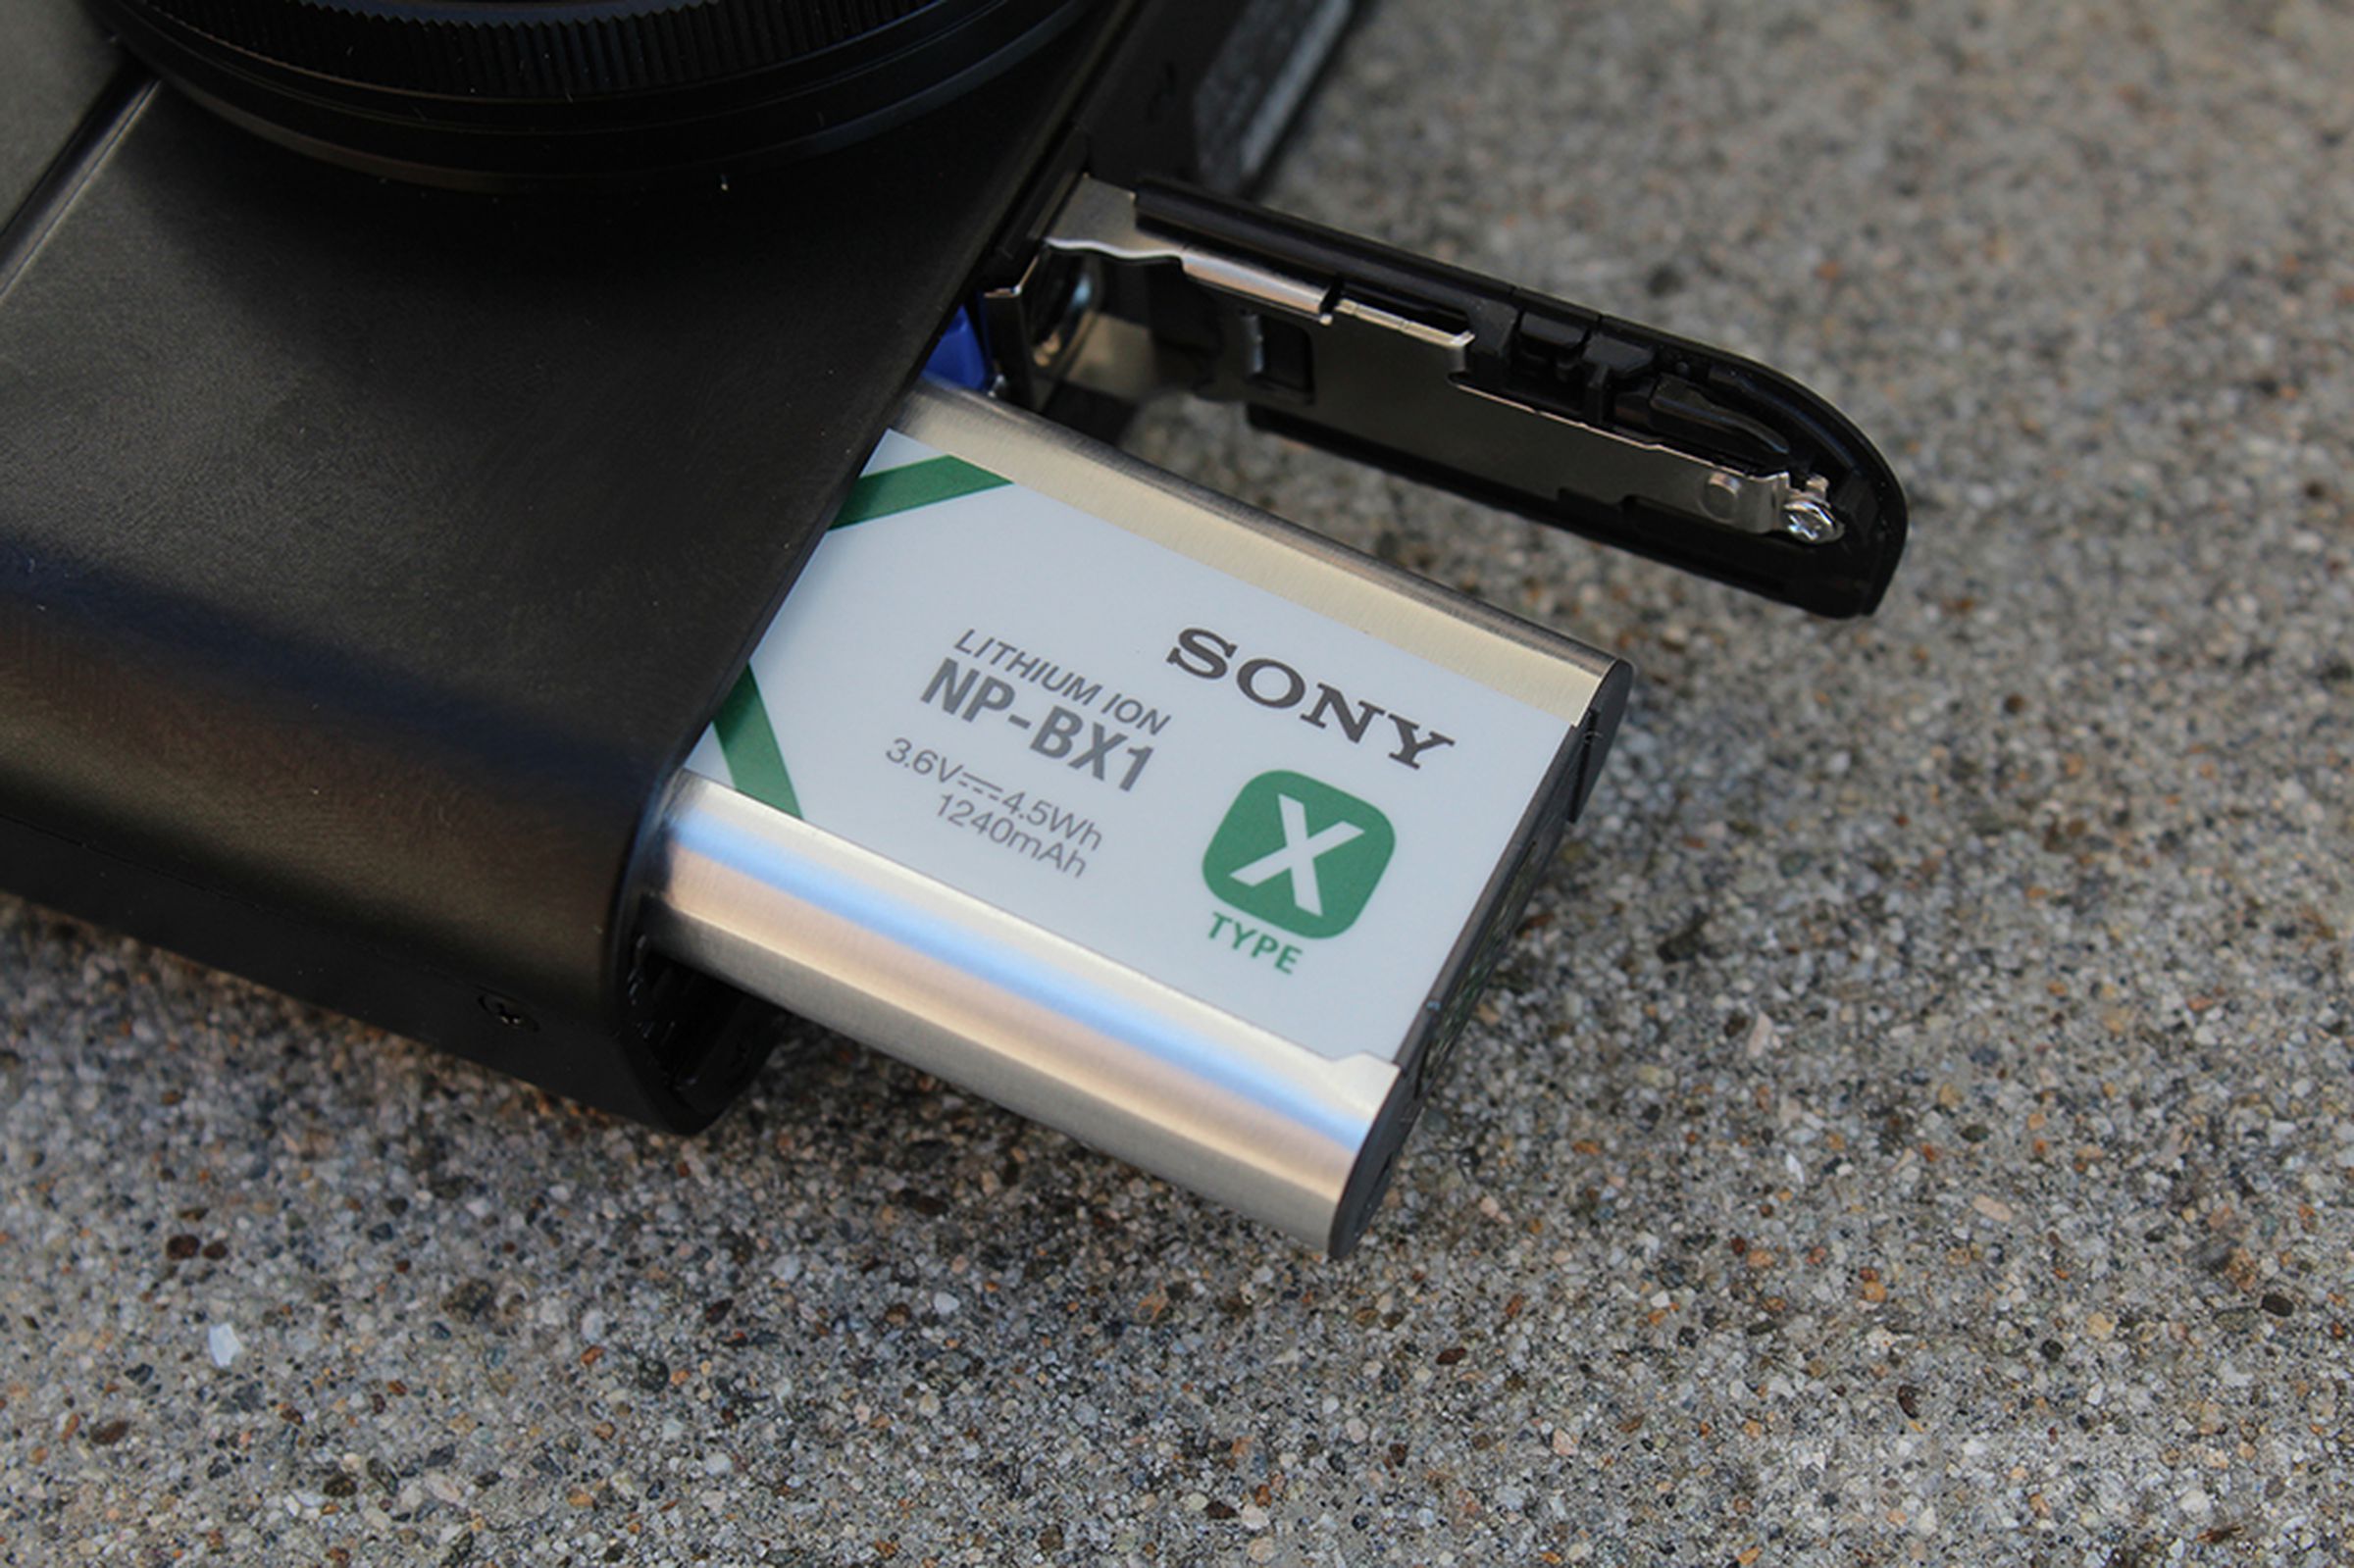 Sony Cyber-shot DSC-RX100 hands on pictures 